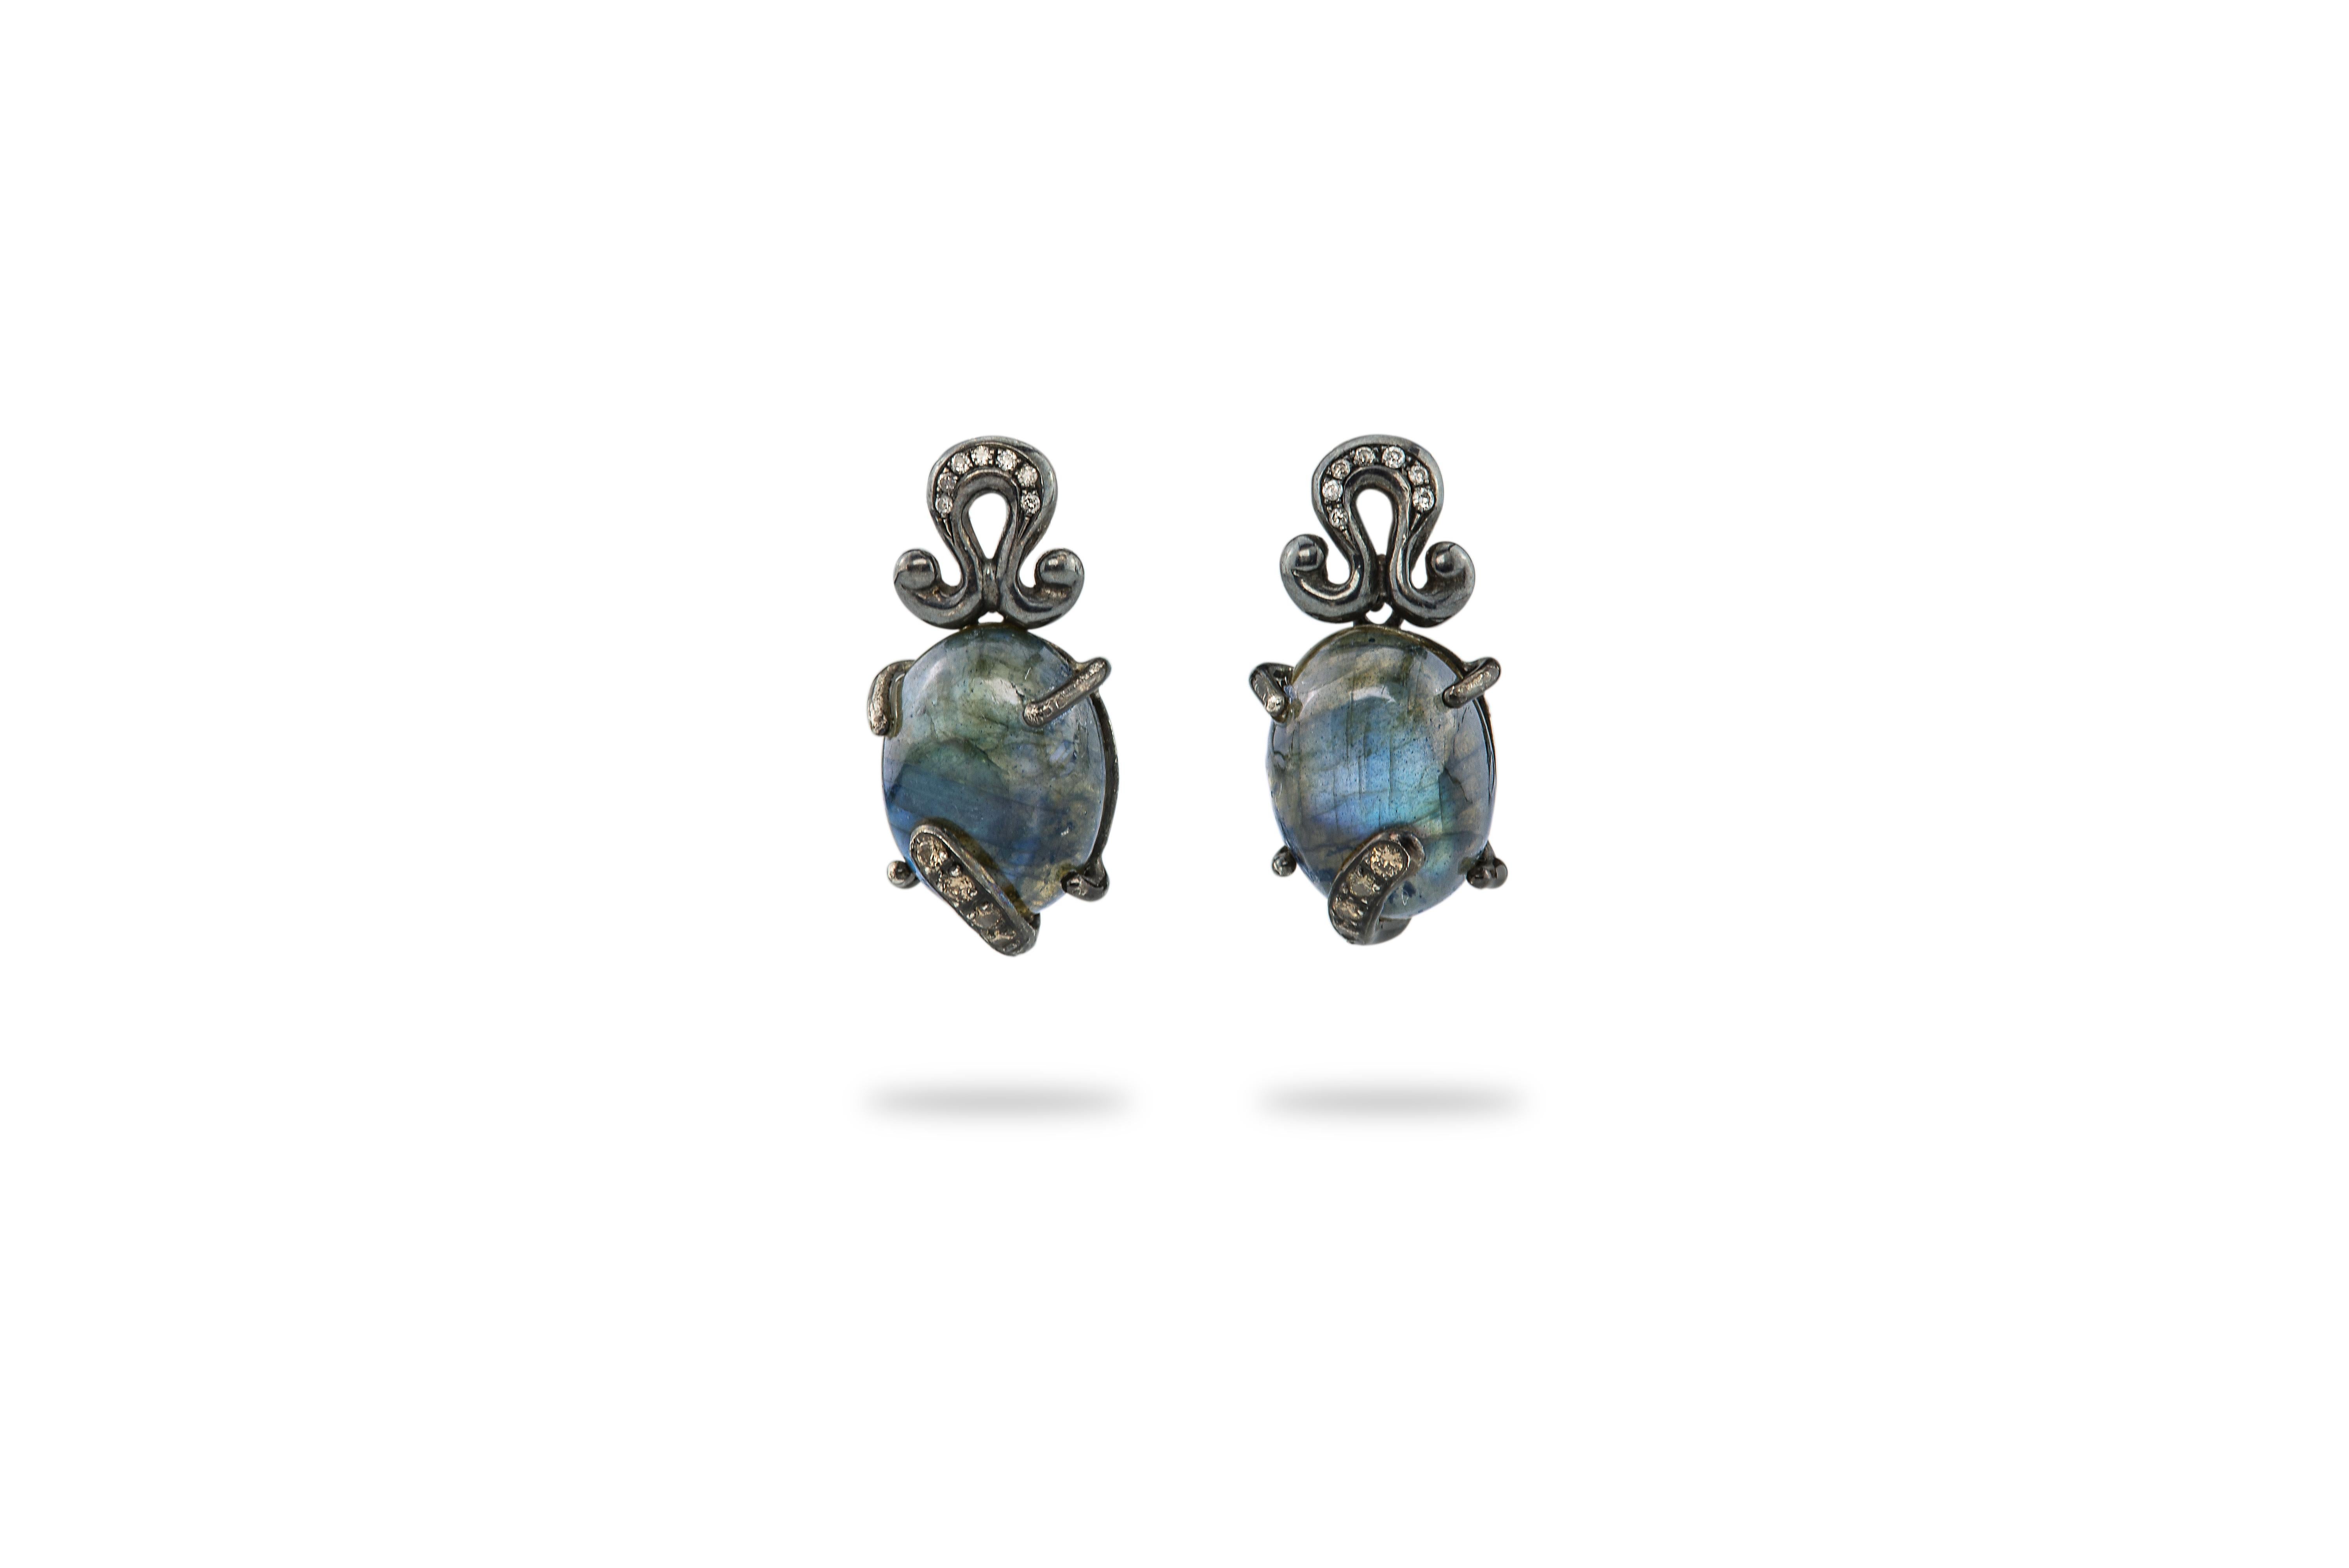 Burnished Silver Labradorite 0.18 Karat Grey Diamonds Dangle DesignEarrings
handcrafted in sterling silver, labradorite and grey diamonds these earrings belong to the Rock collection made with burnished silver and softened by colored stones and are